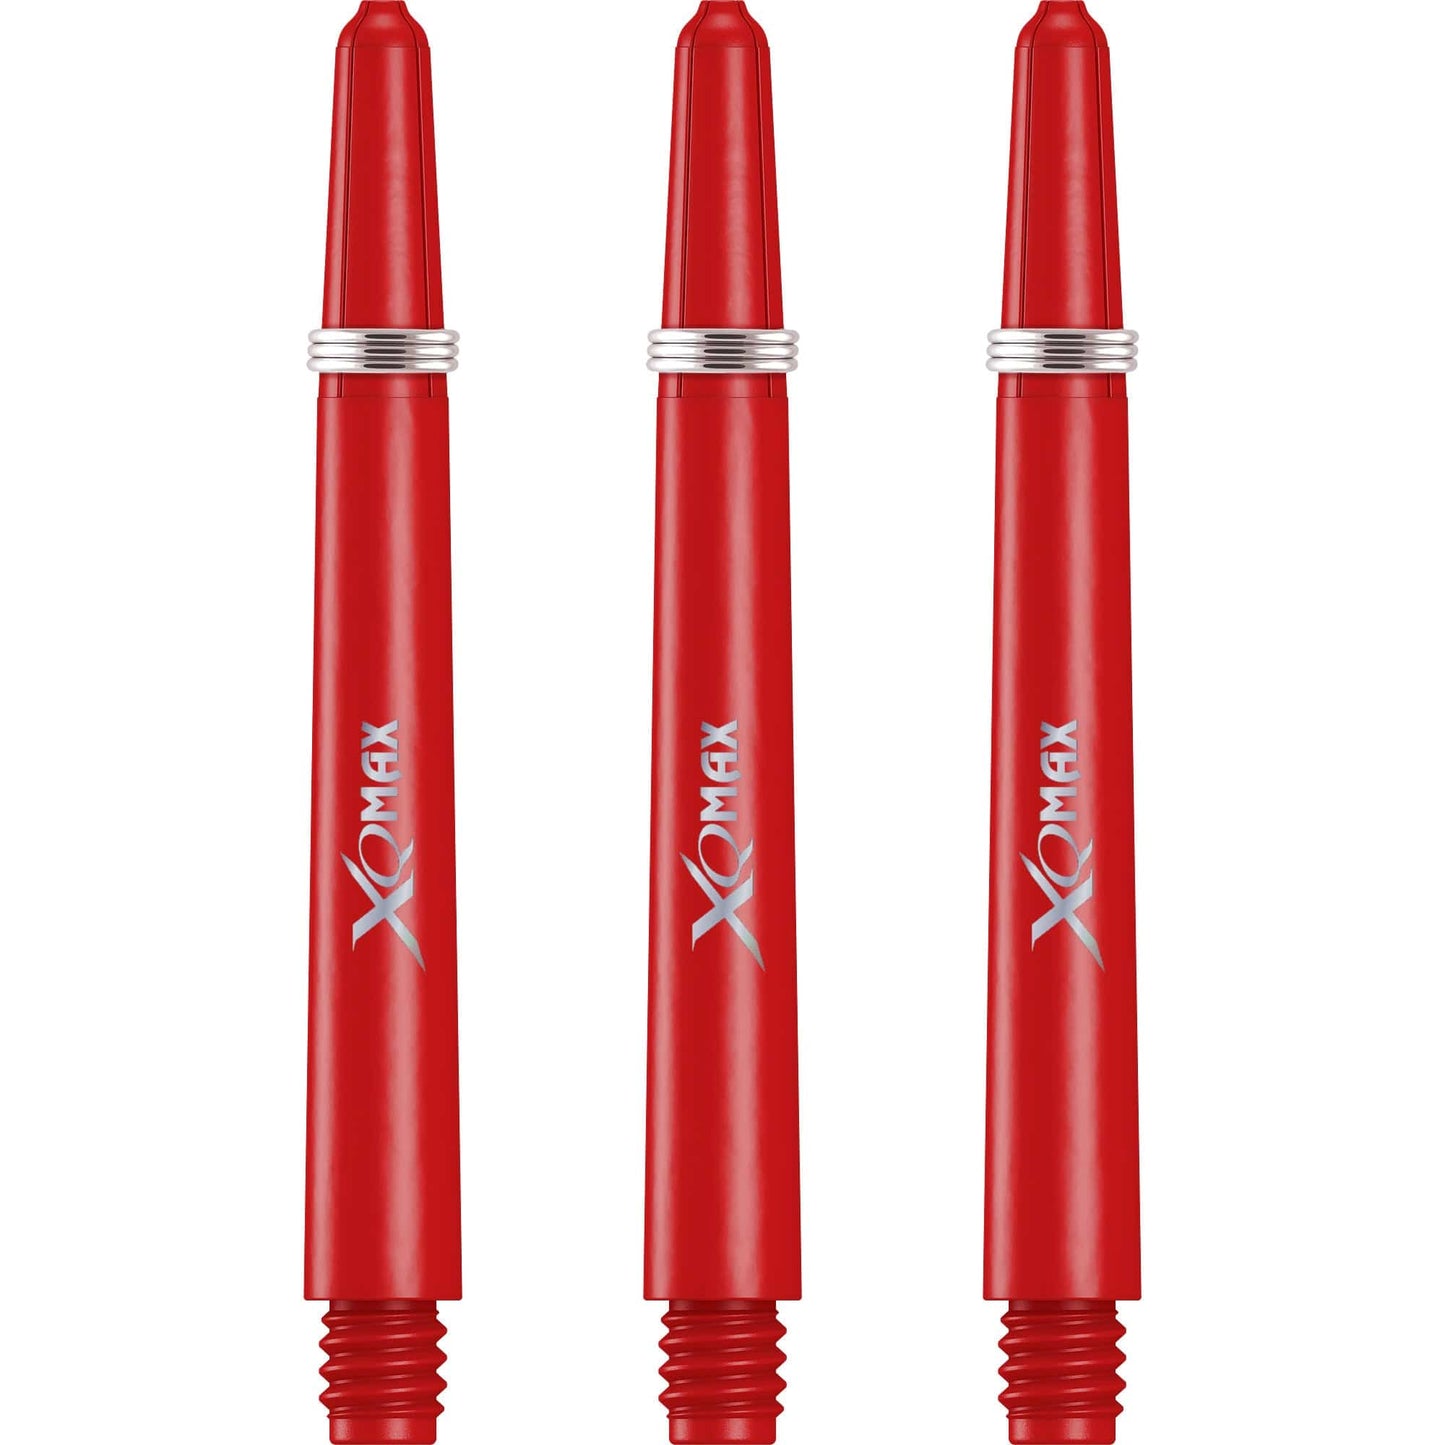 XQMax Polycarbonate Dart Shafts - Solid Colour with Logo - includes Springs - Red Medium